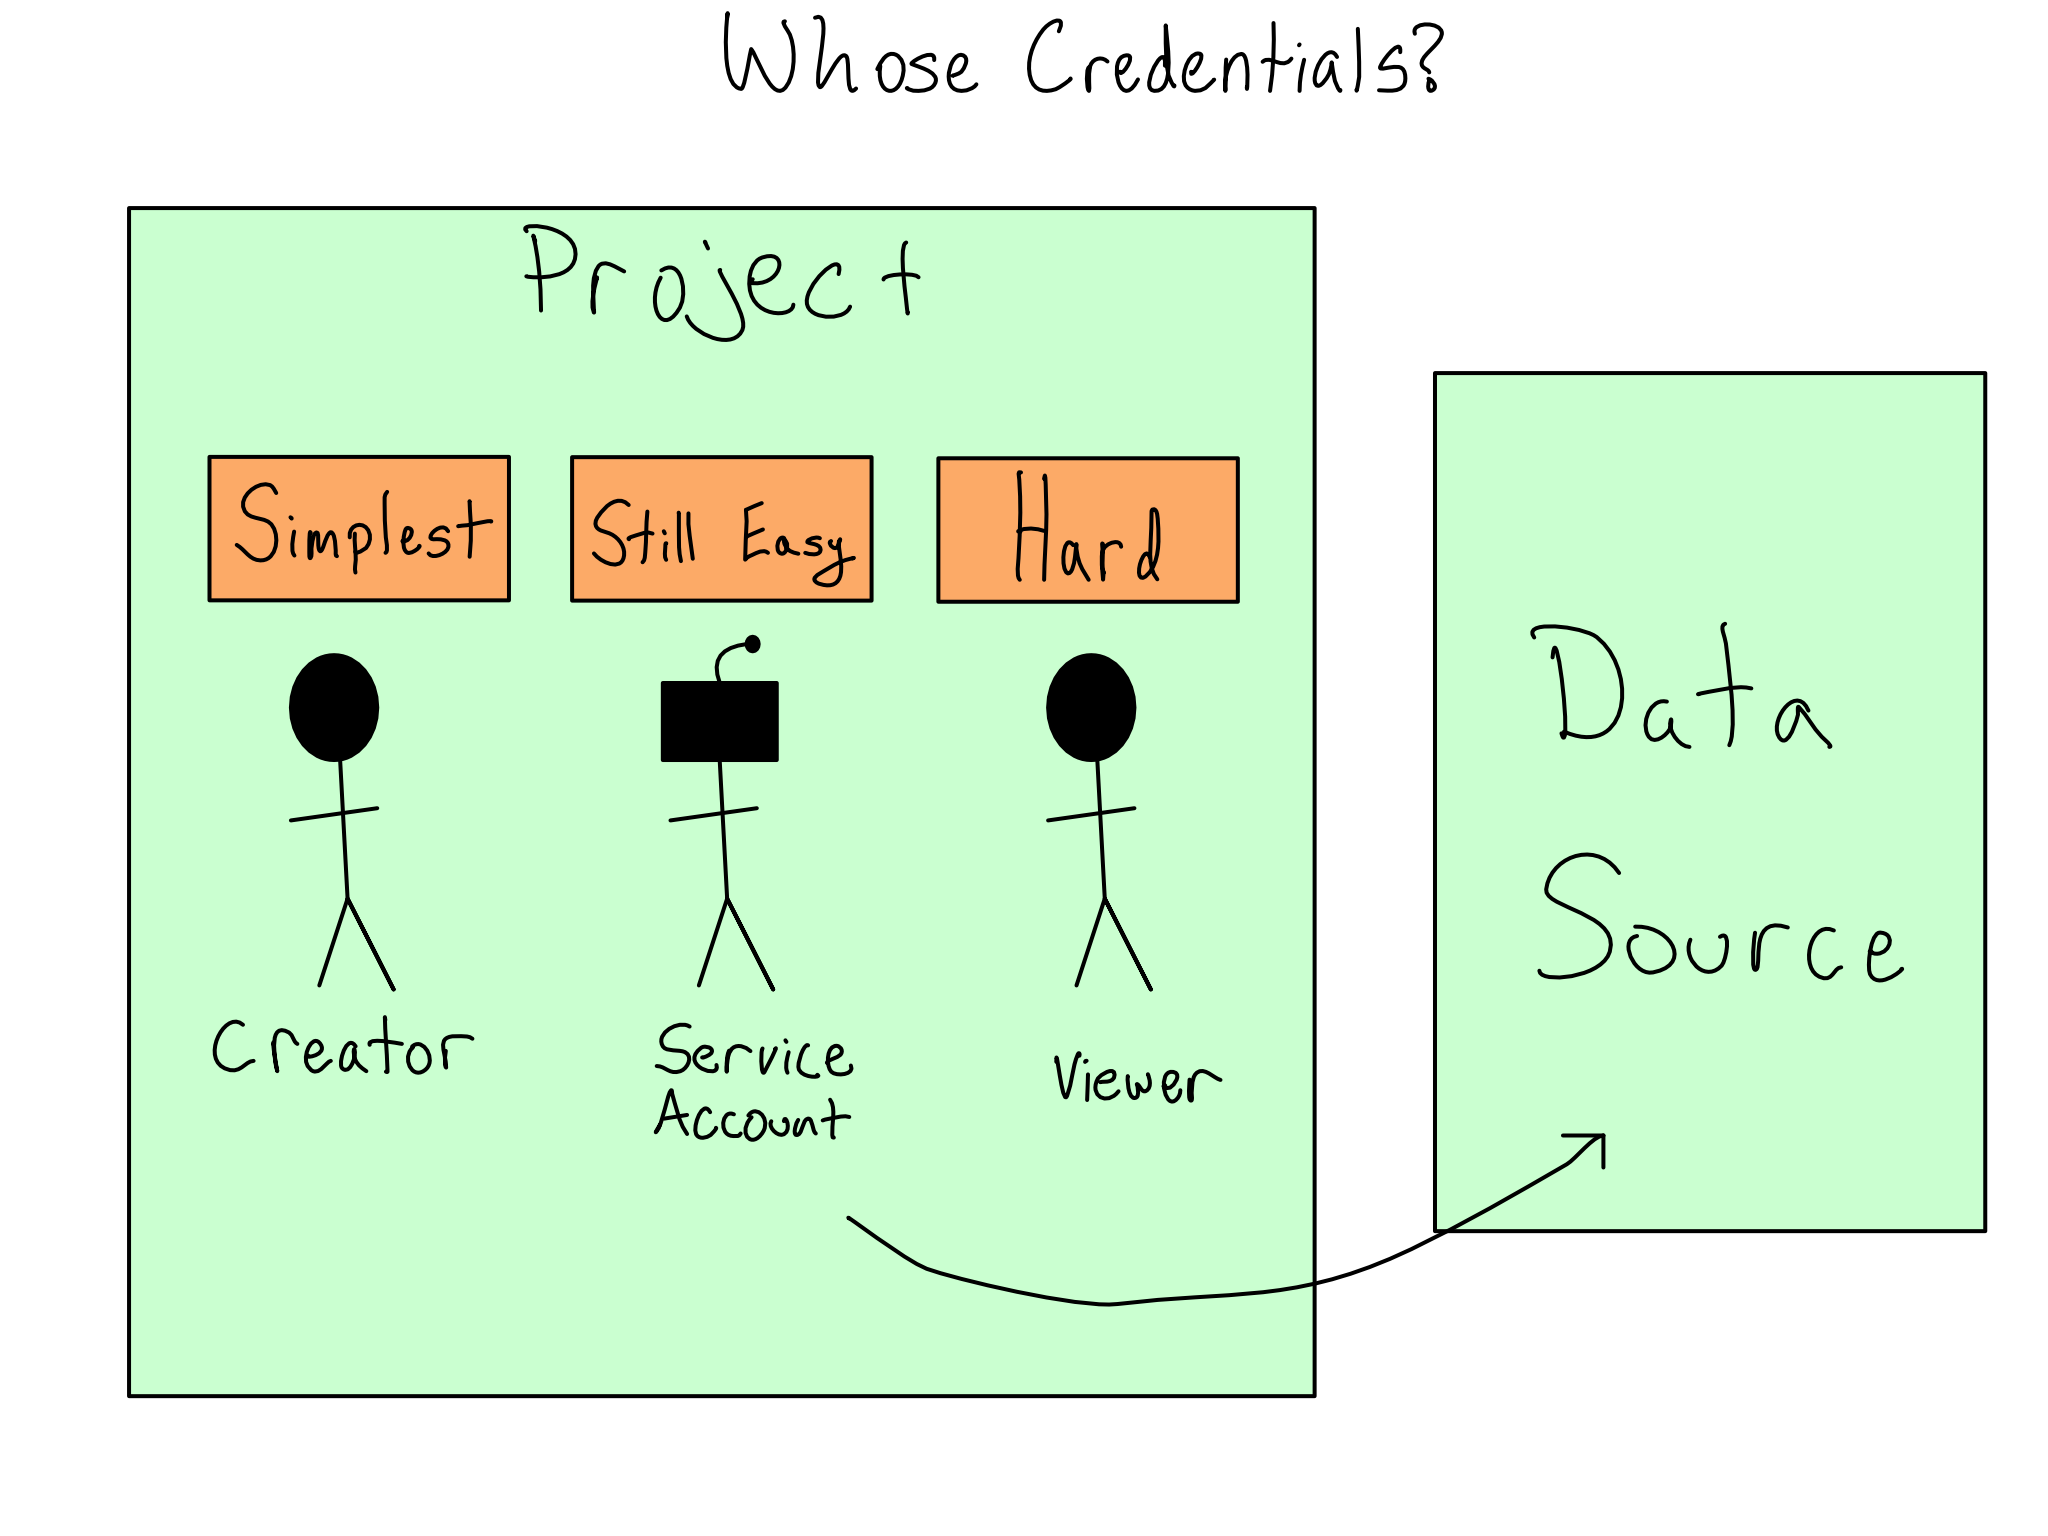 A diagram showing that using project creator credentials is simplest, service account is still easy, and viewer is hard.